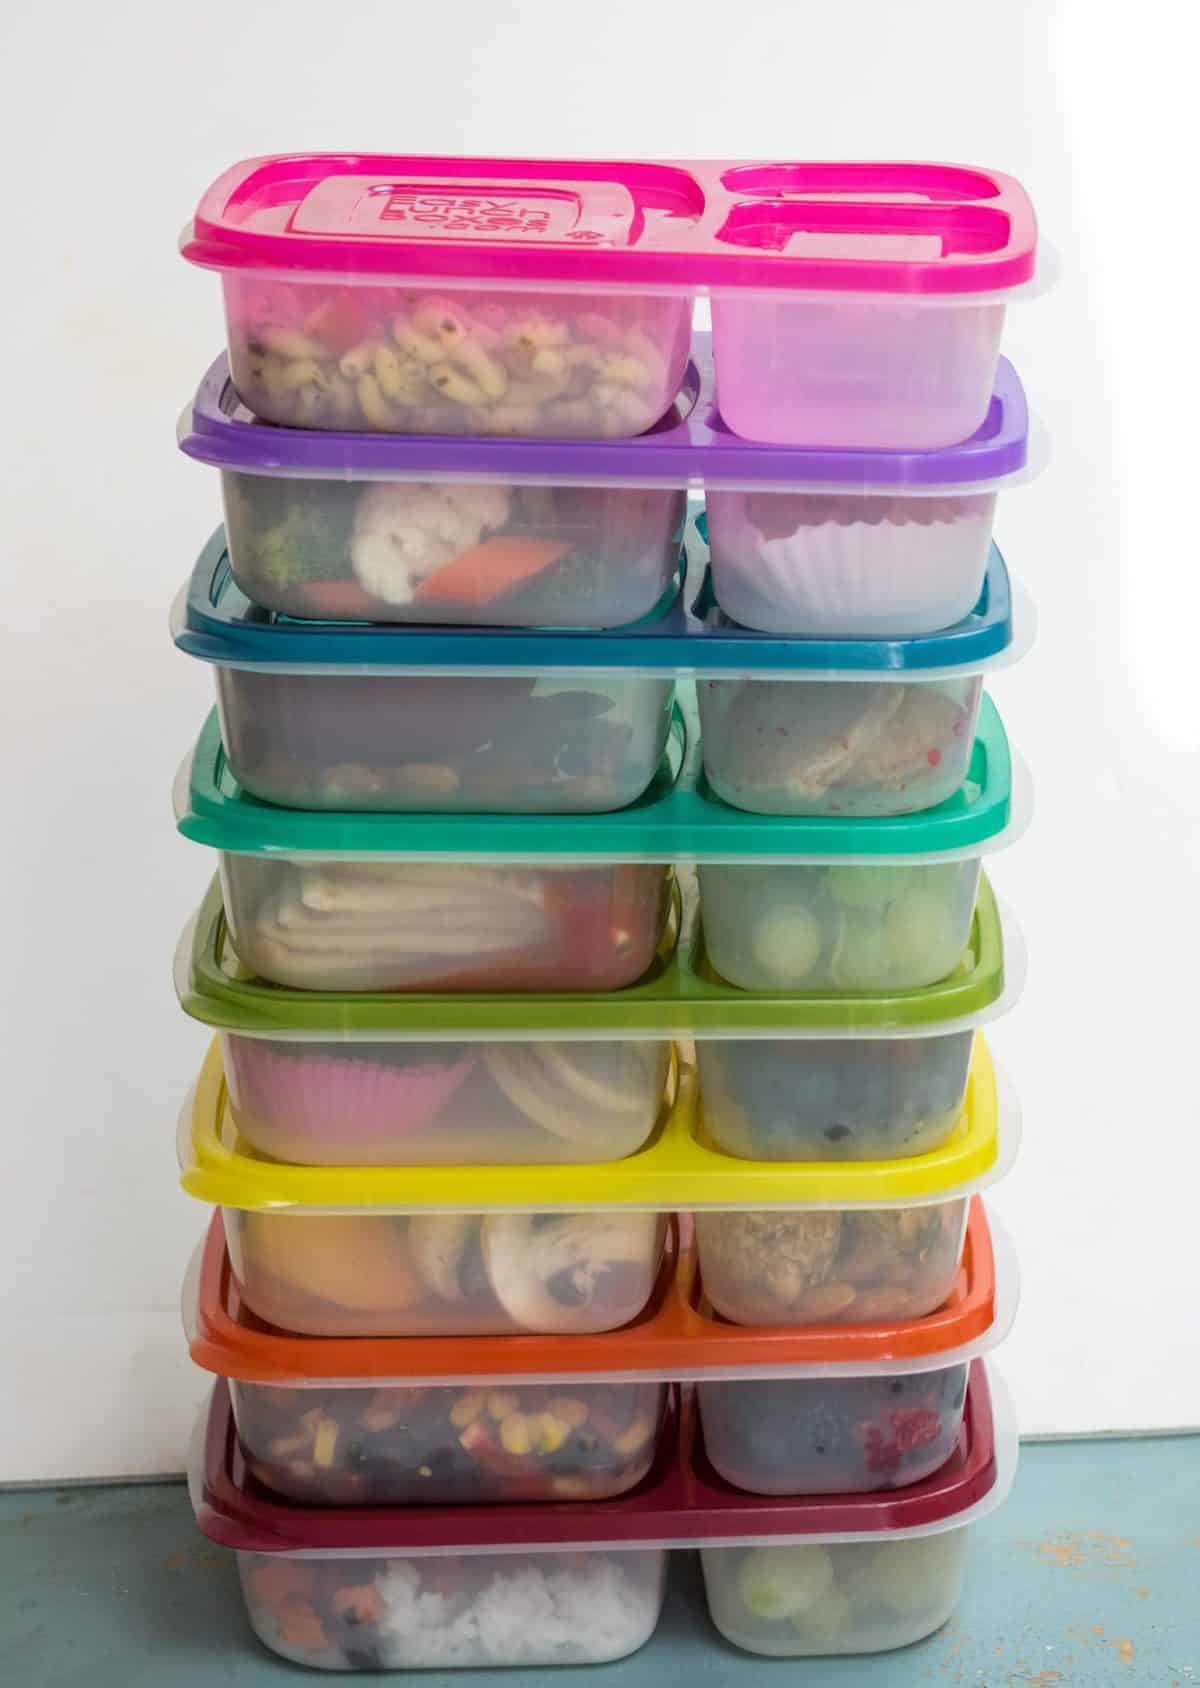 Simple school lunchbox ideas to keep kids happy and costs low